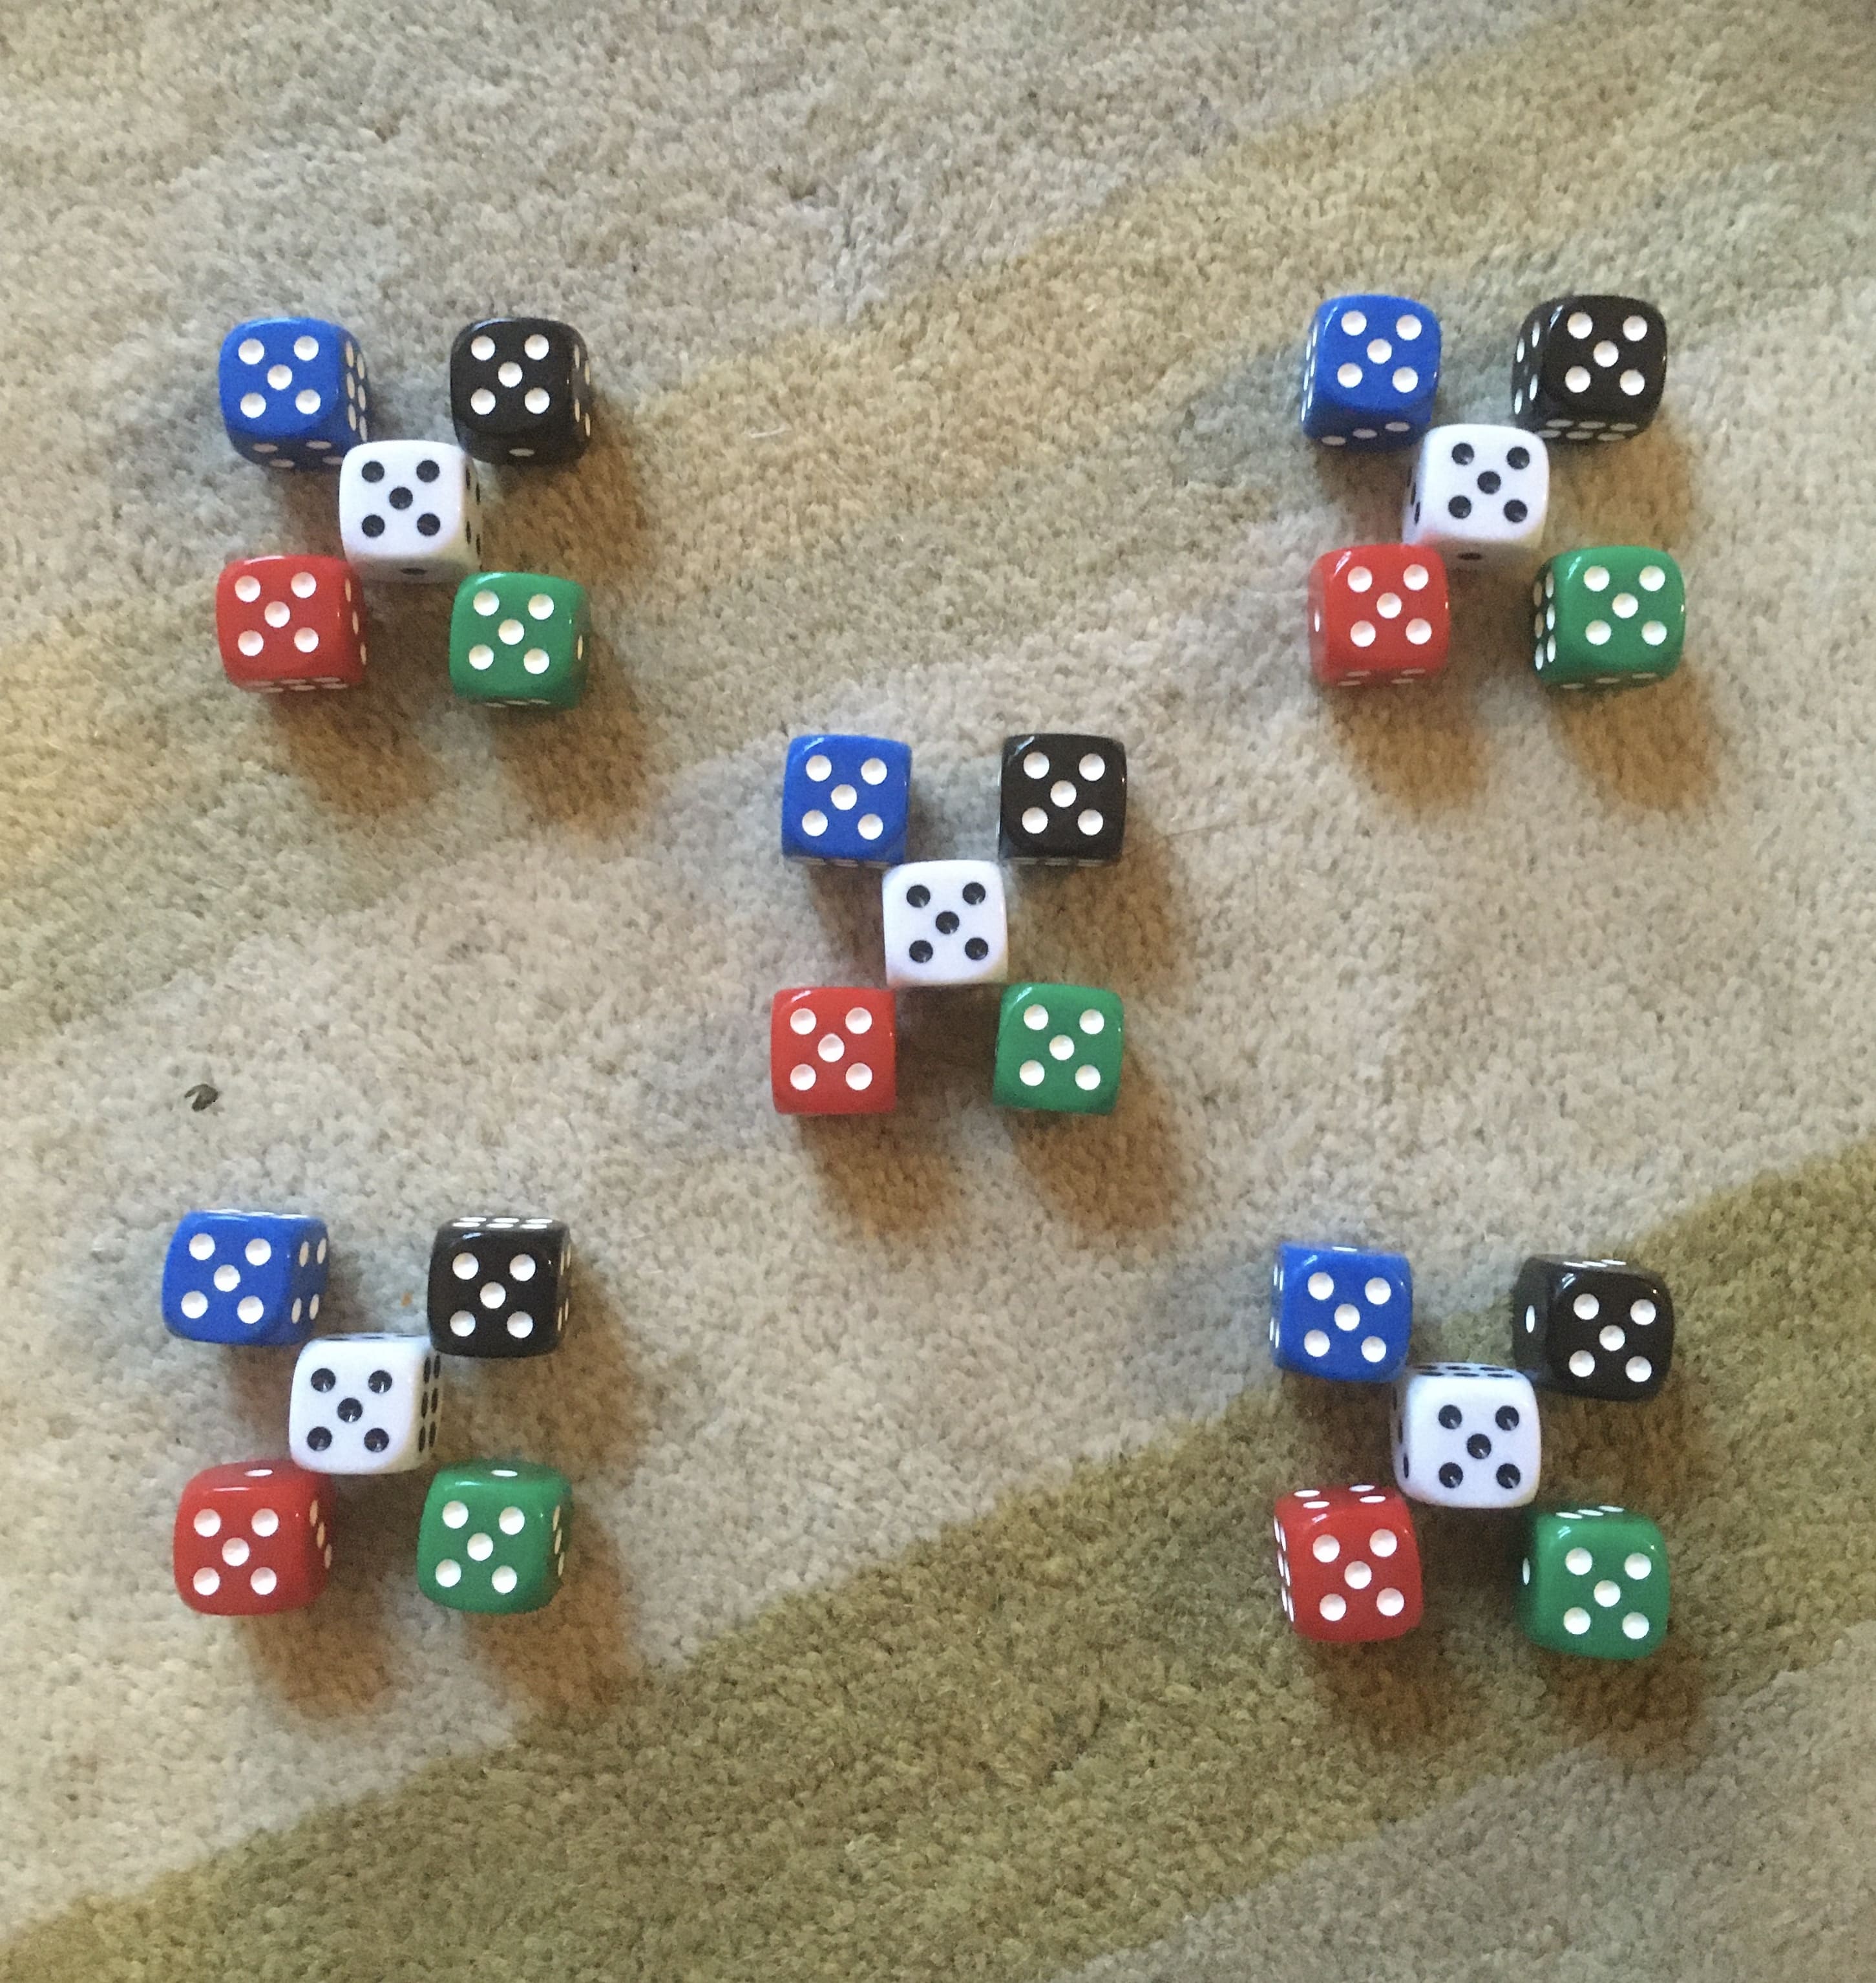 Image Description: 25 dice arranged into groups of 5, each with 5 spots showing